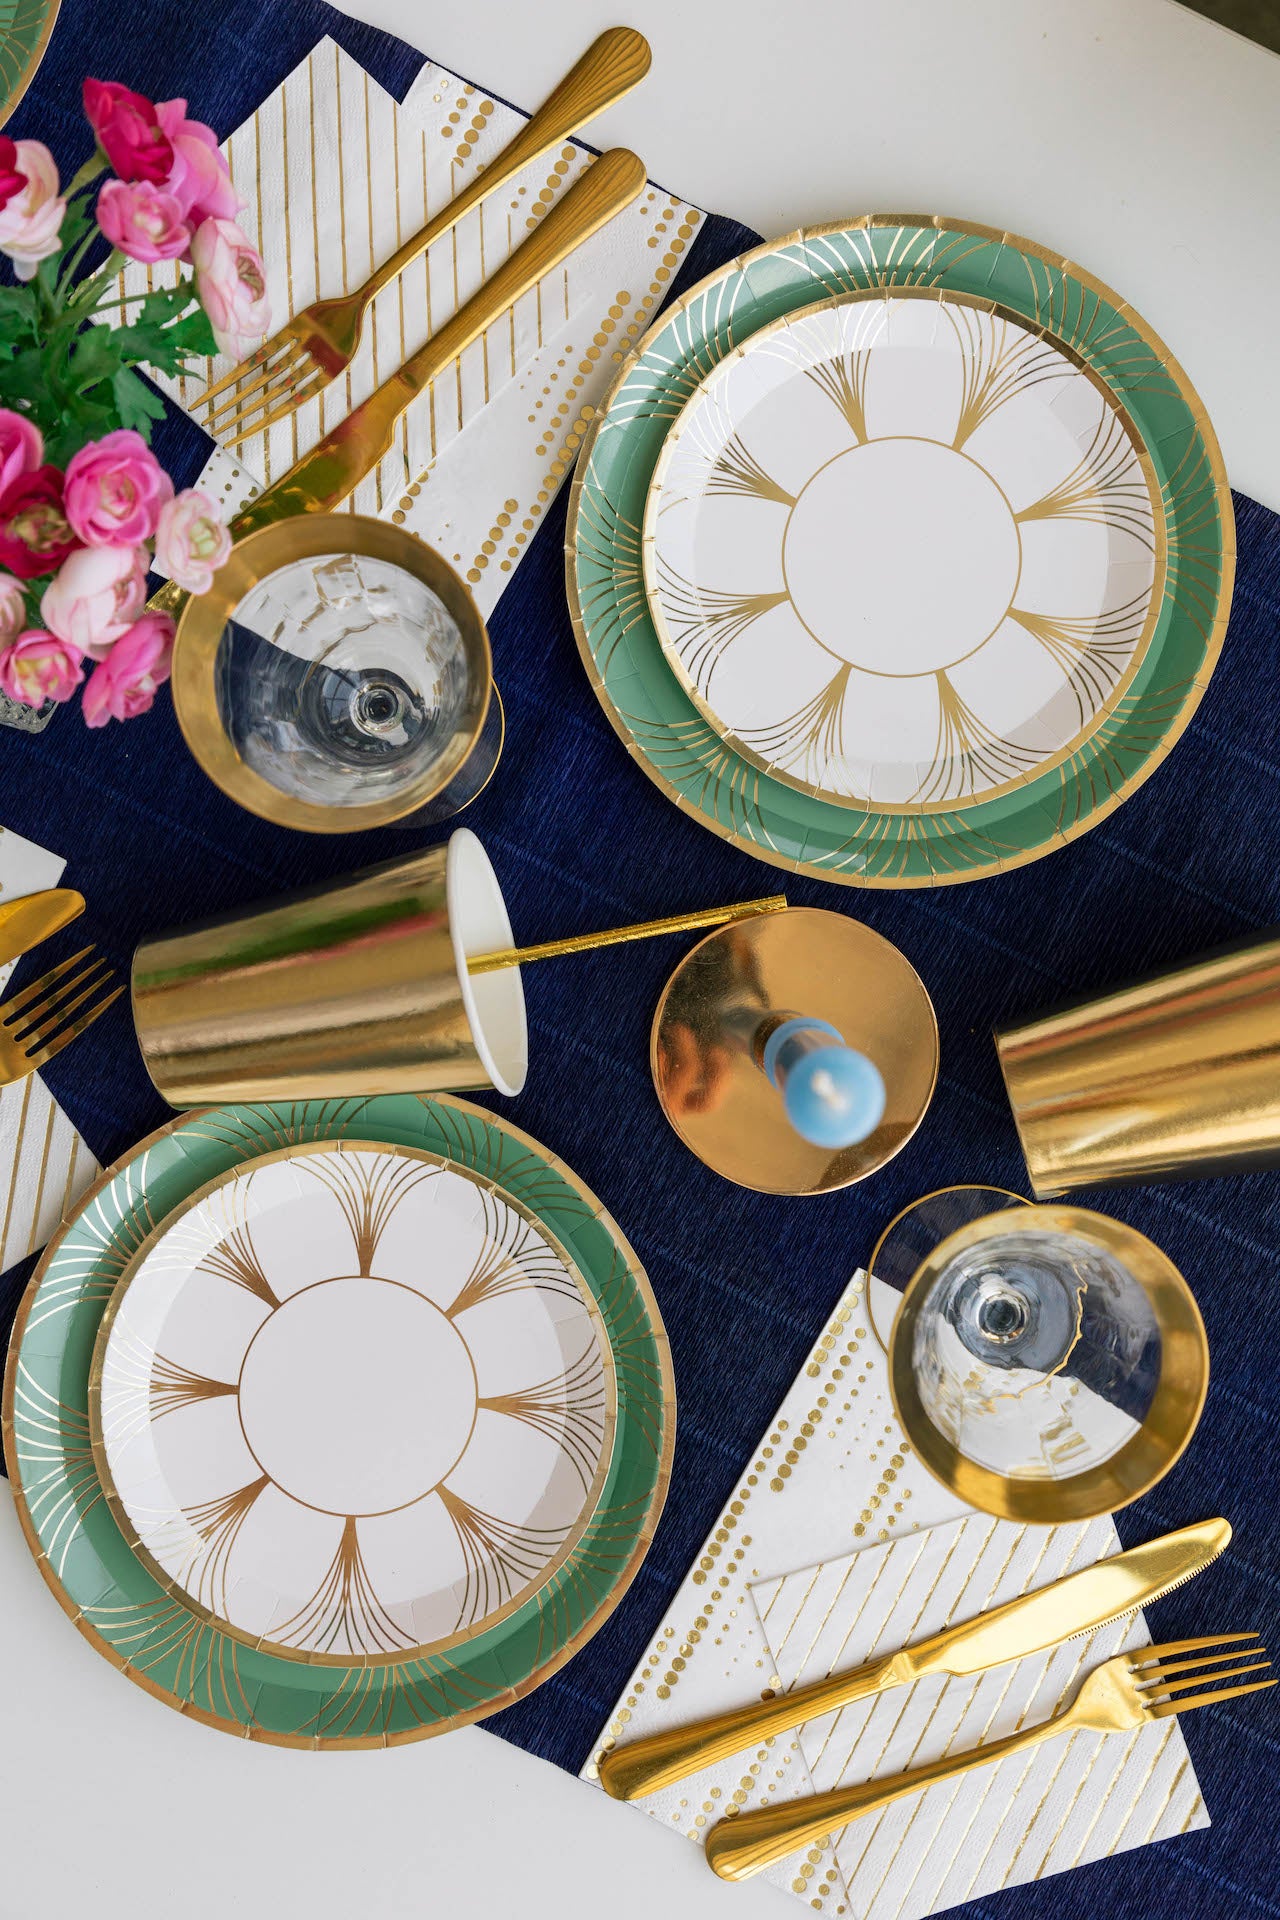 The Gatz Small Plates, white and gold (set of 8)